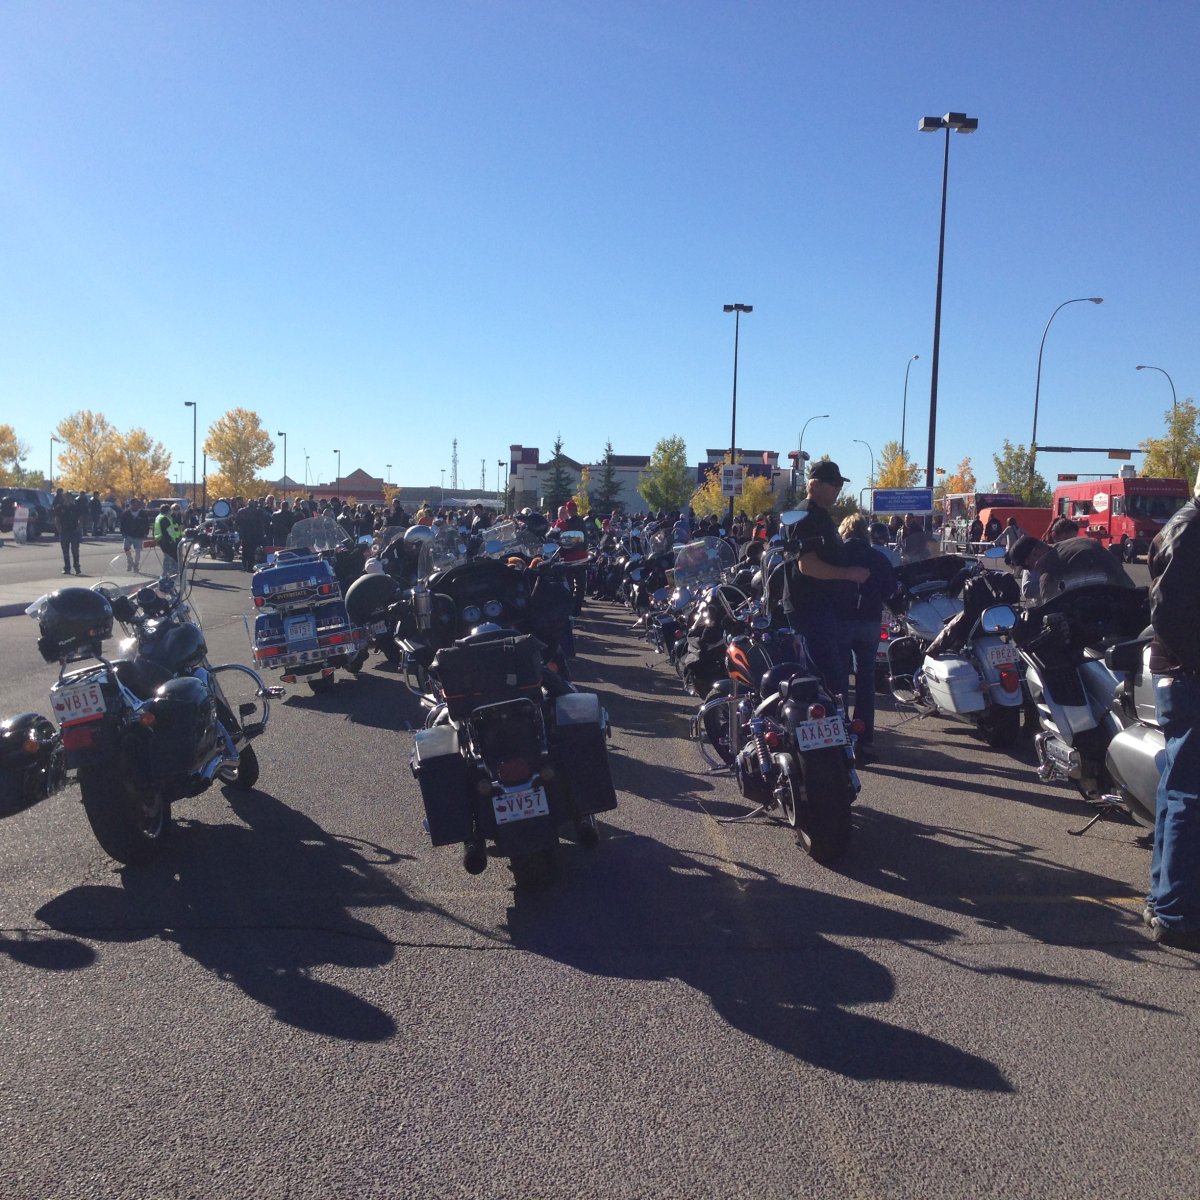 Motorcyclists parked at the Walmart in Shawnessy for the Magic of Christmas motorcycle toy run.   